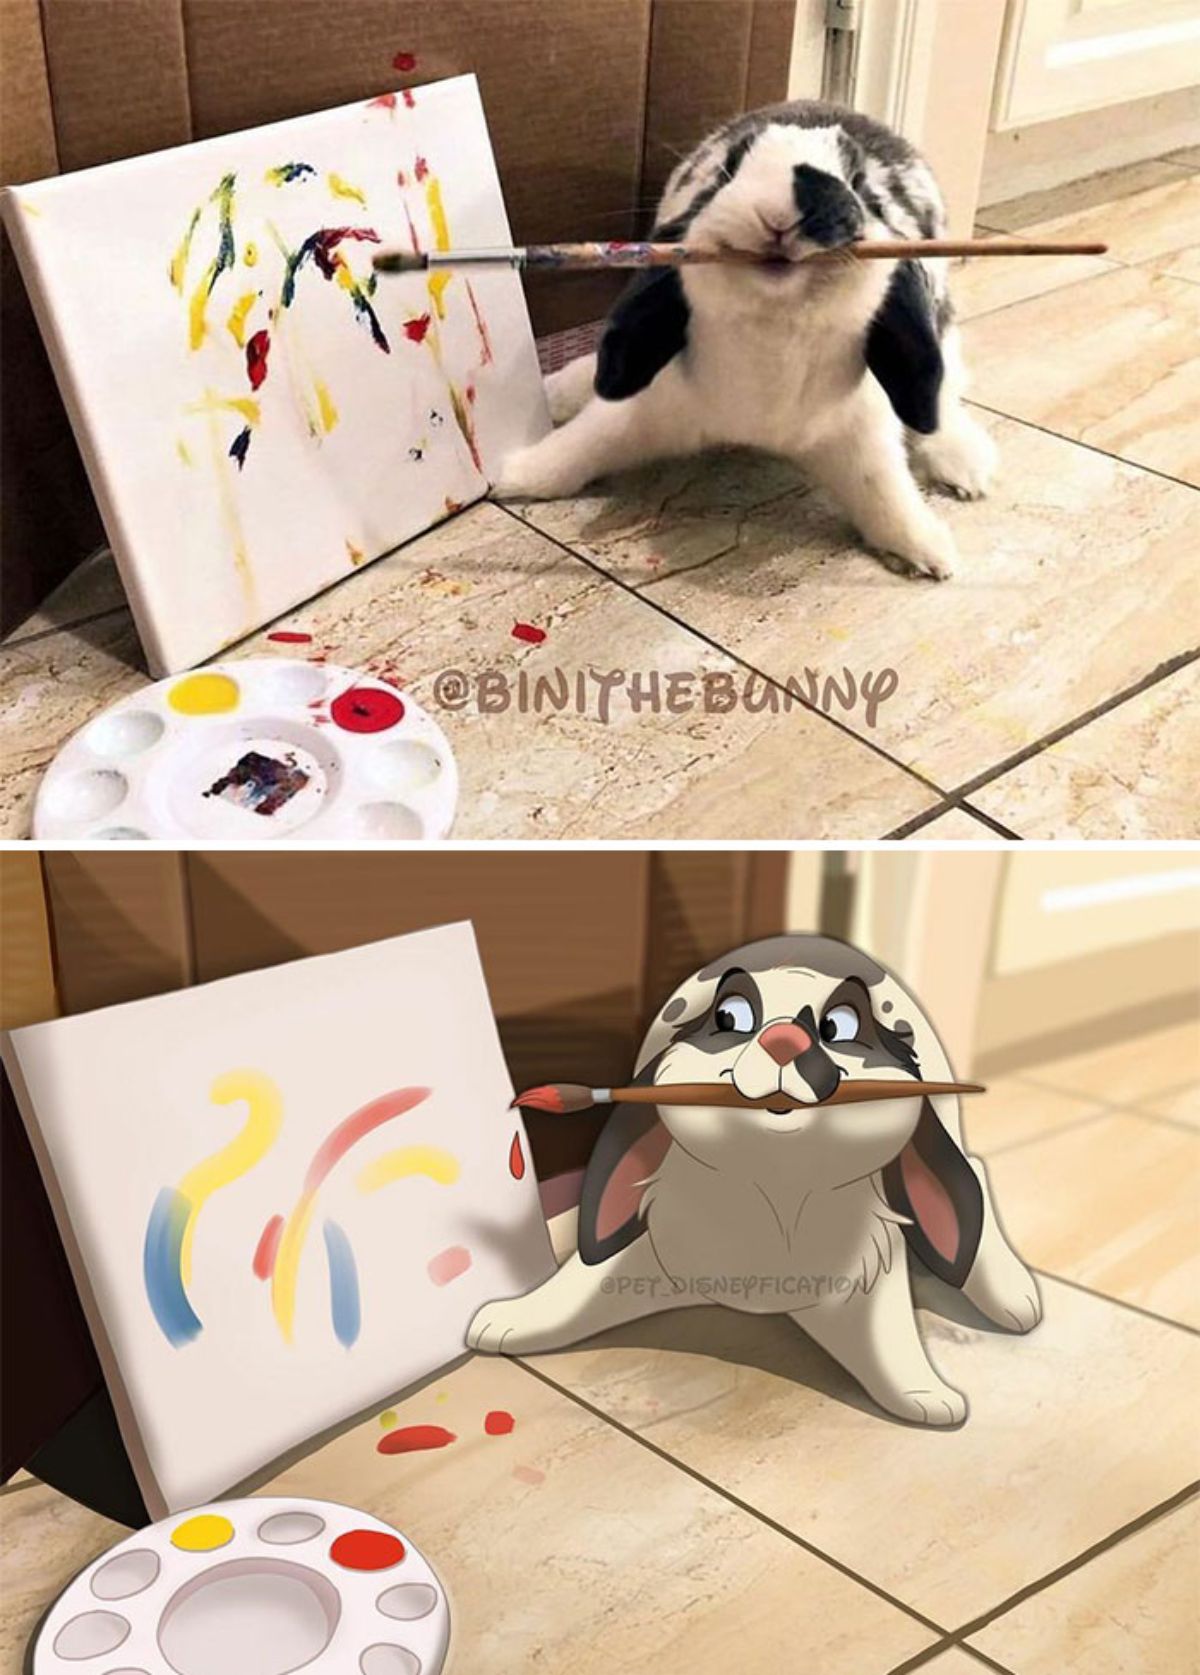 real photo and cartoon image of a black and white bunny holding a paint brush in its mouth next to a canvas painting with splashes of colour